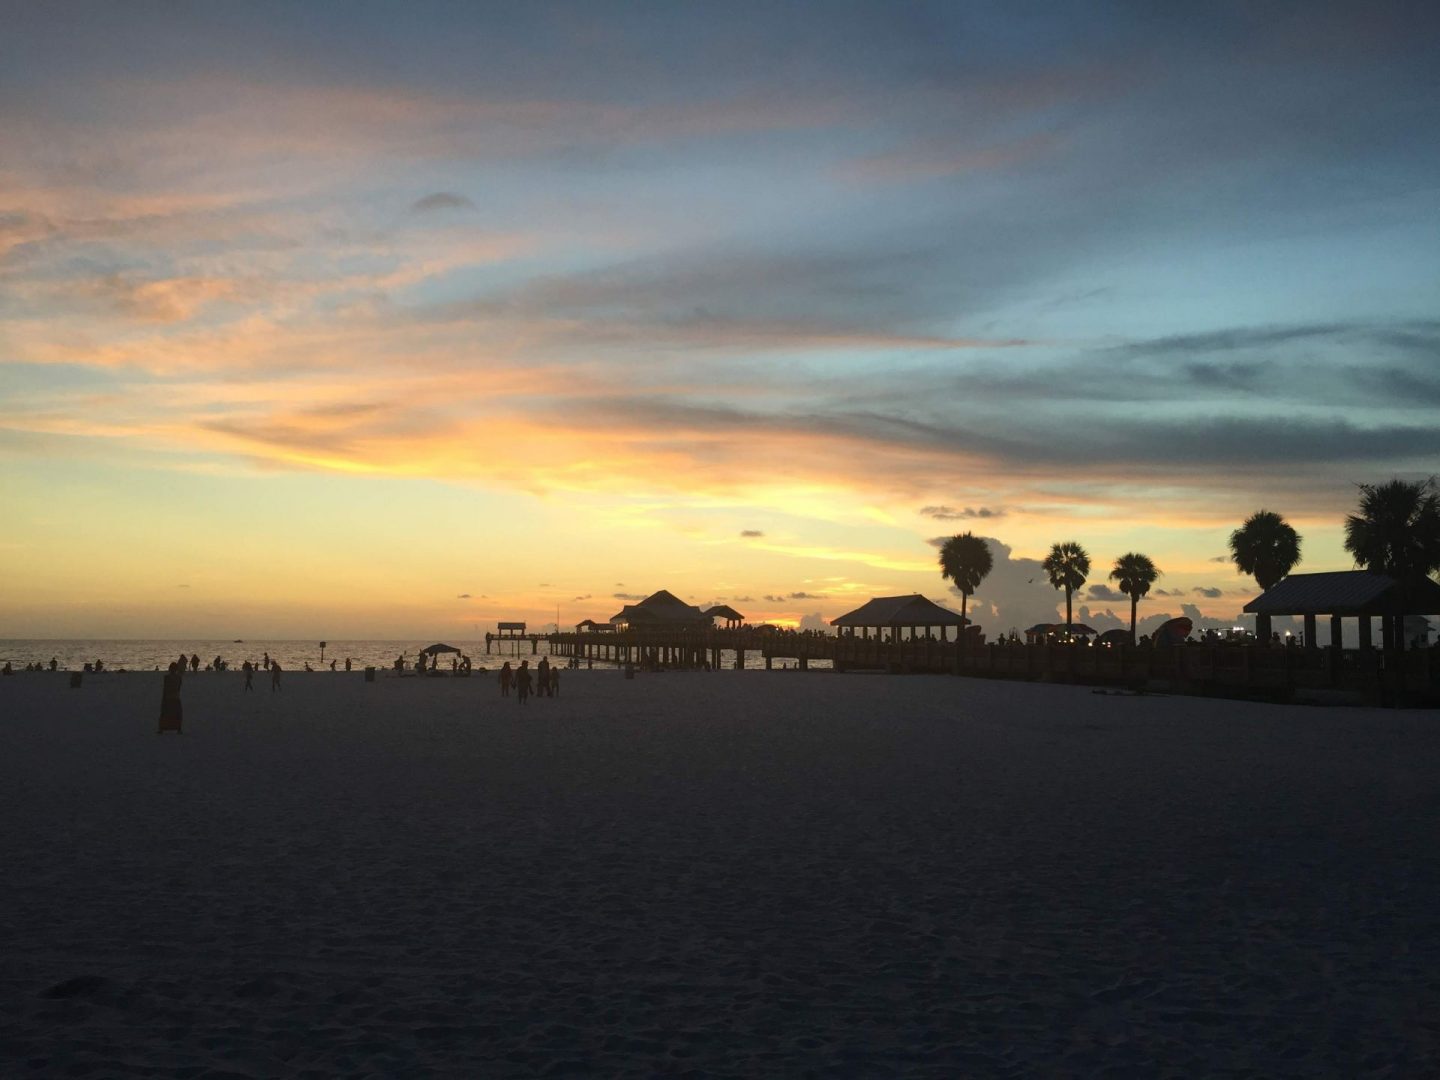 Clearwater Beach, Florida at sunset